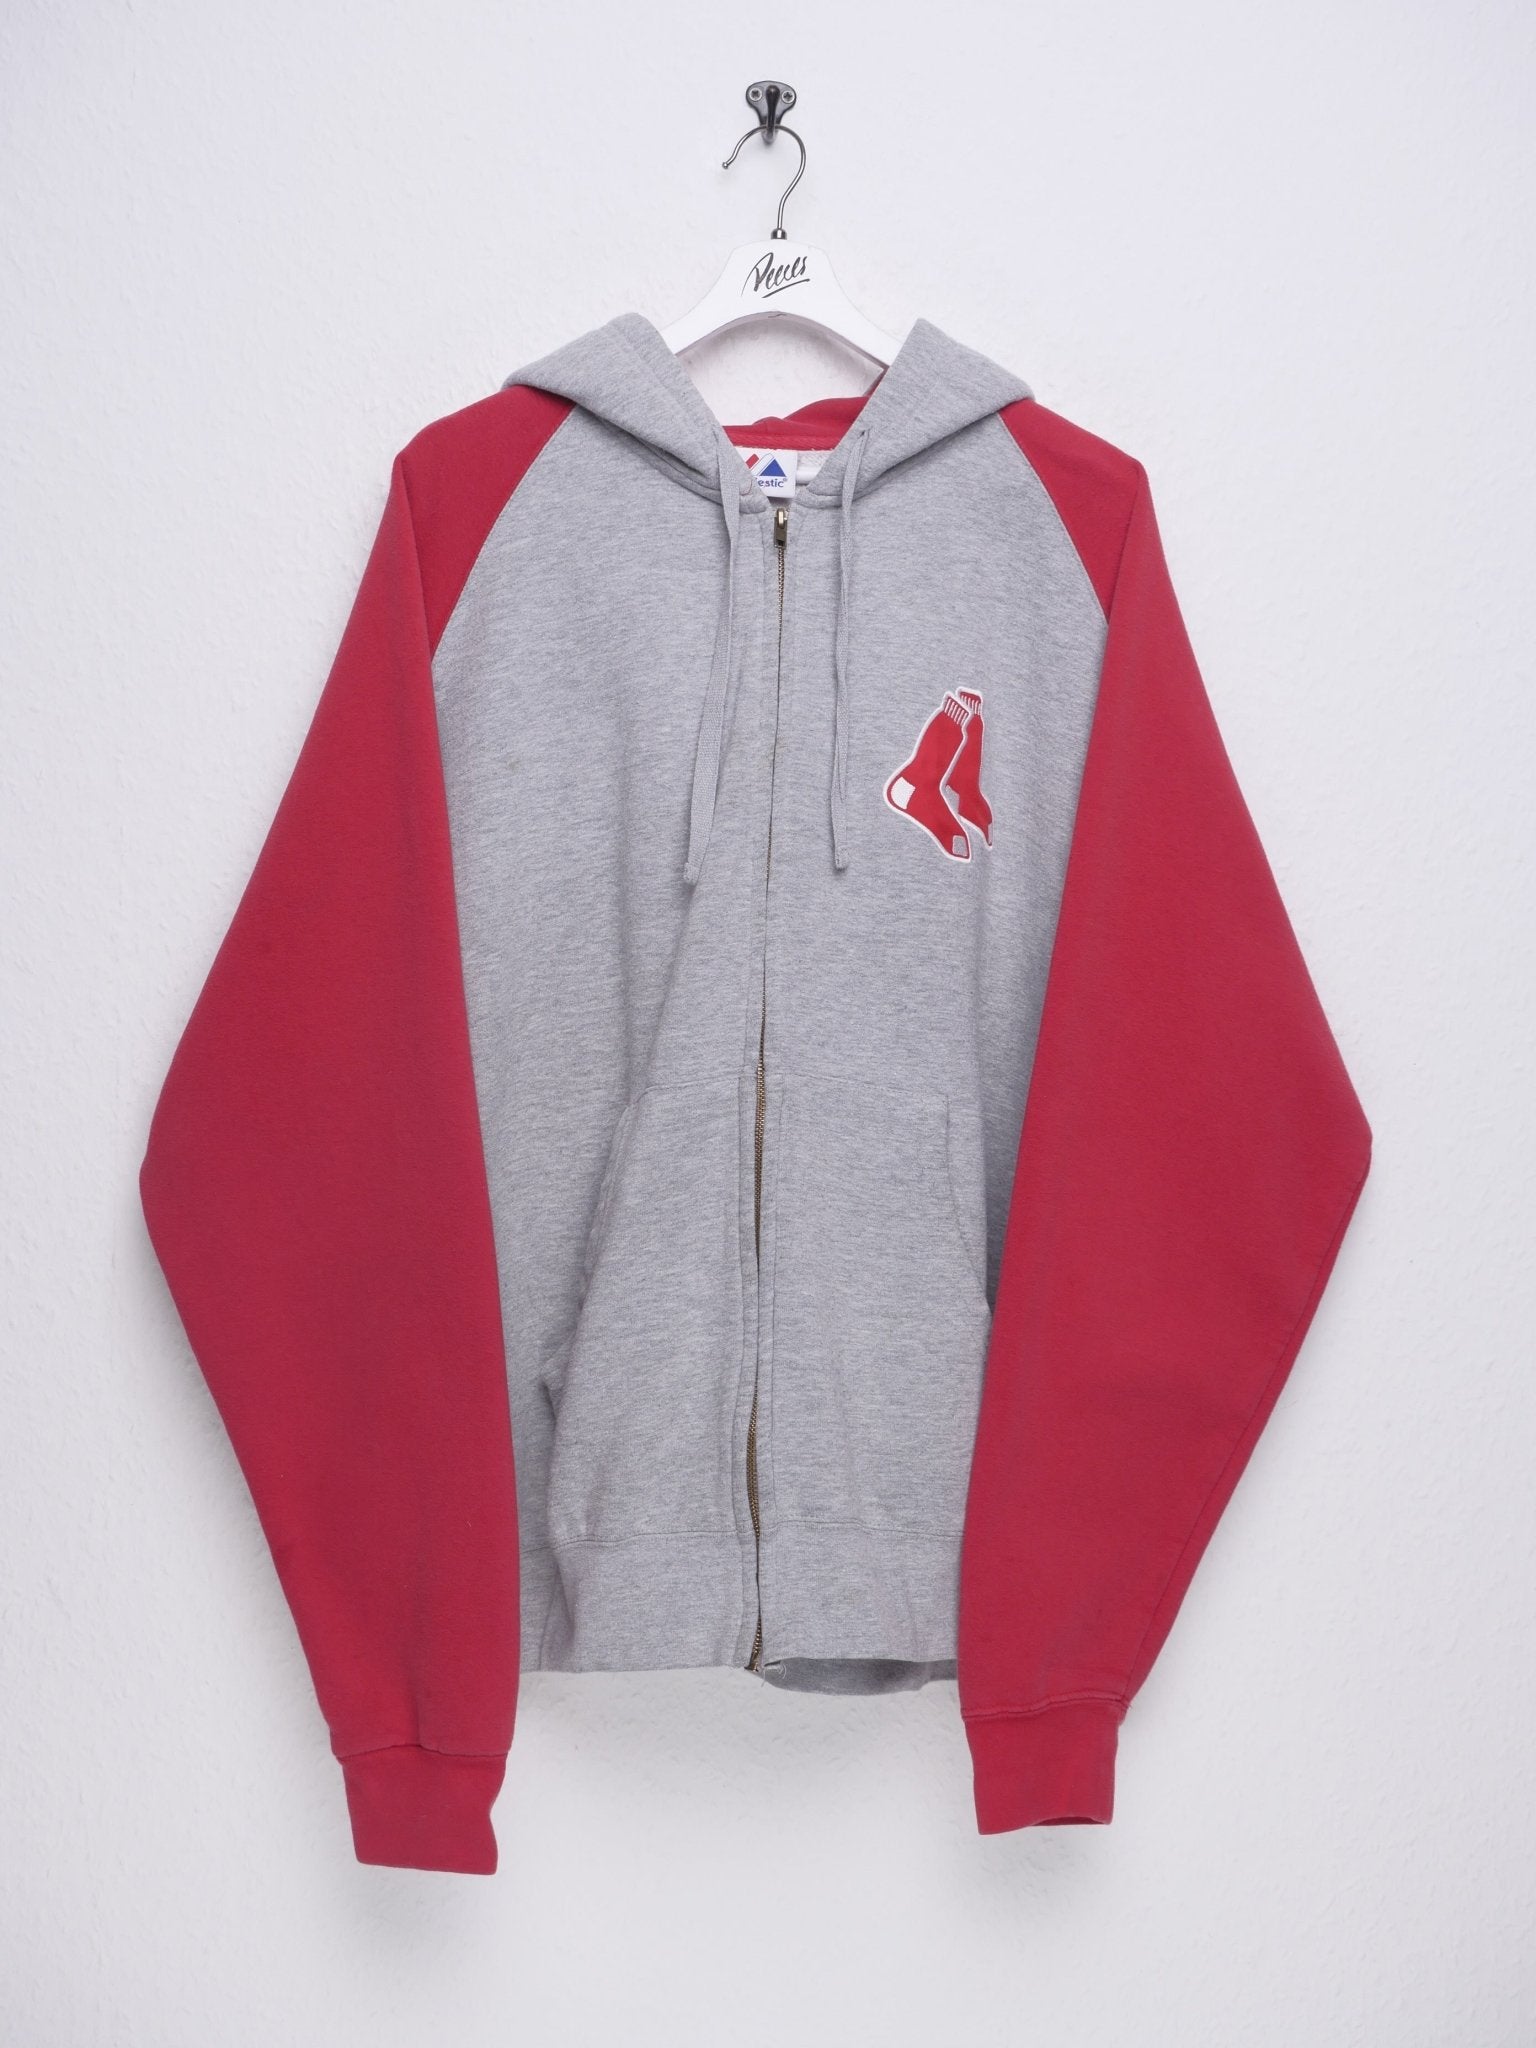 Majestic Boston Red Sox embroidered Logo two toned Zip Hoodie - Peeces